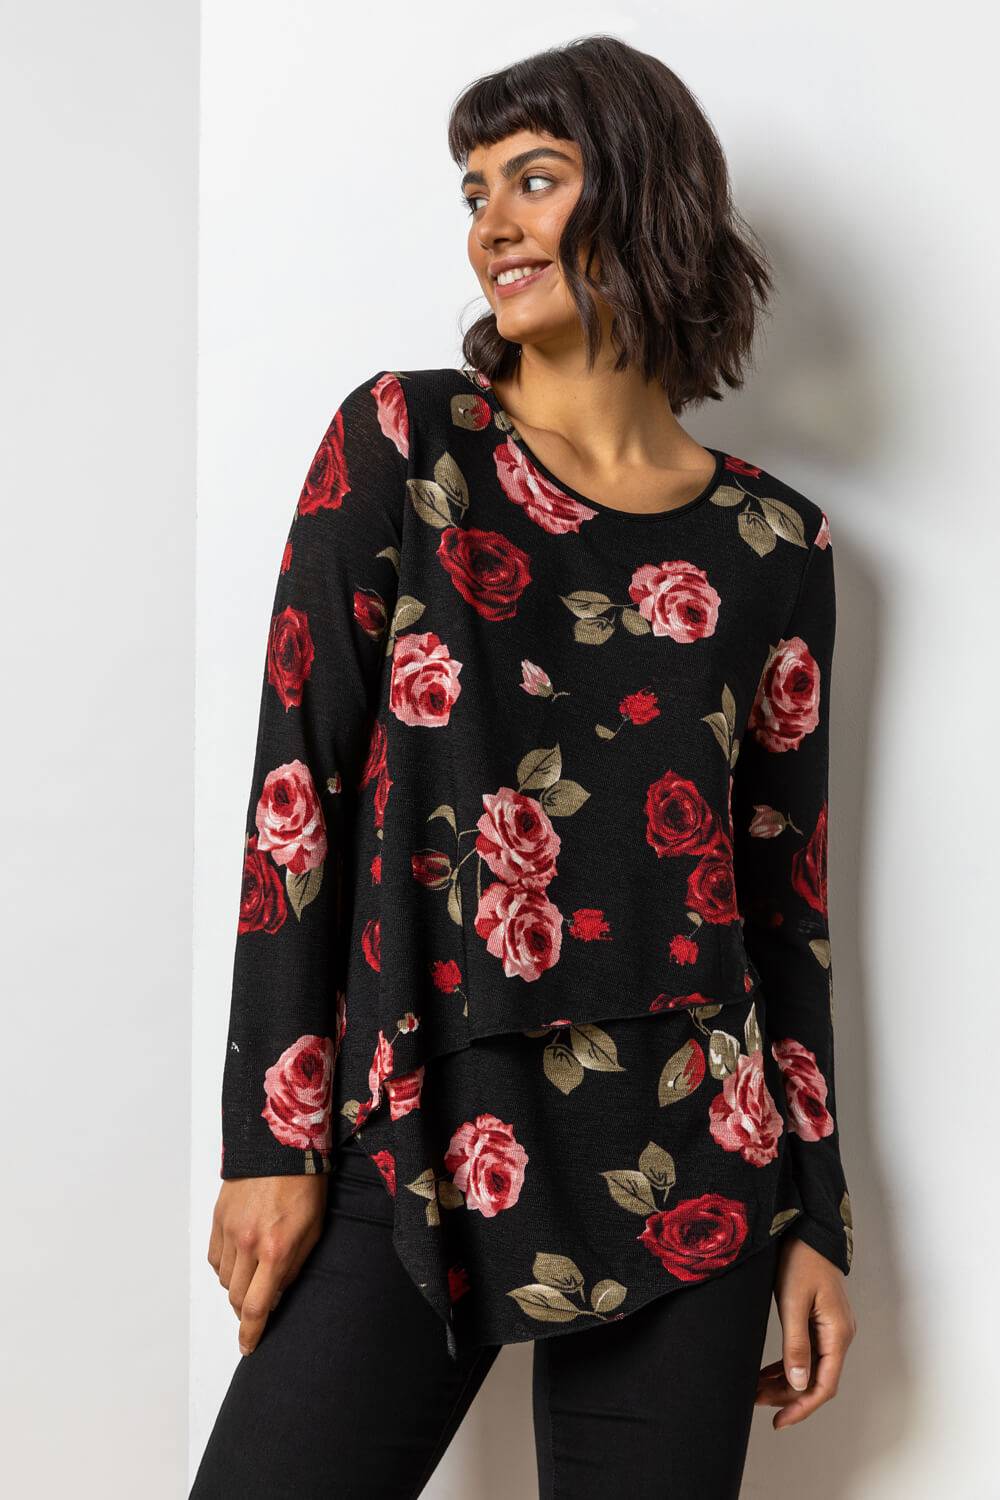 PINK Floral Rose Print Layered Asymmetric Top , Image 1 of 5